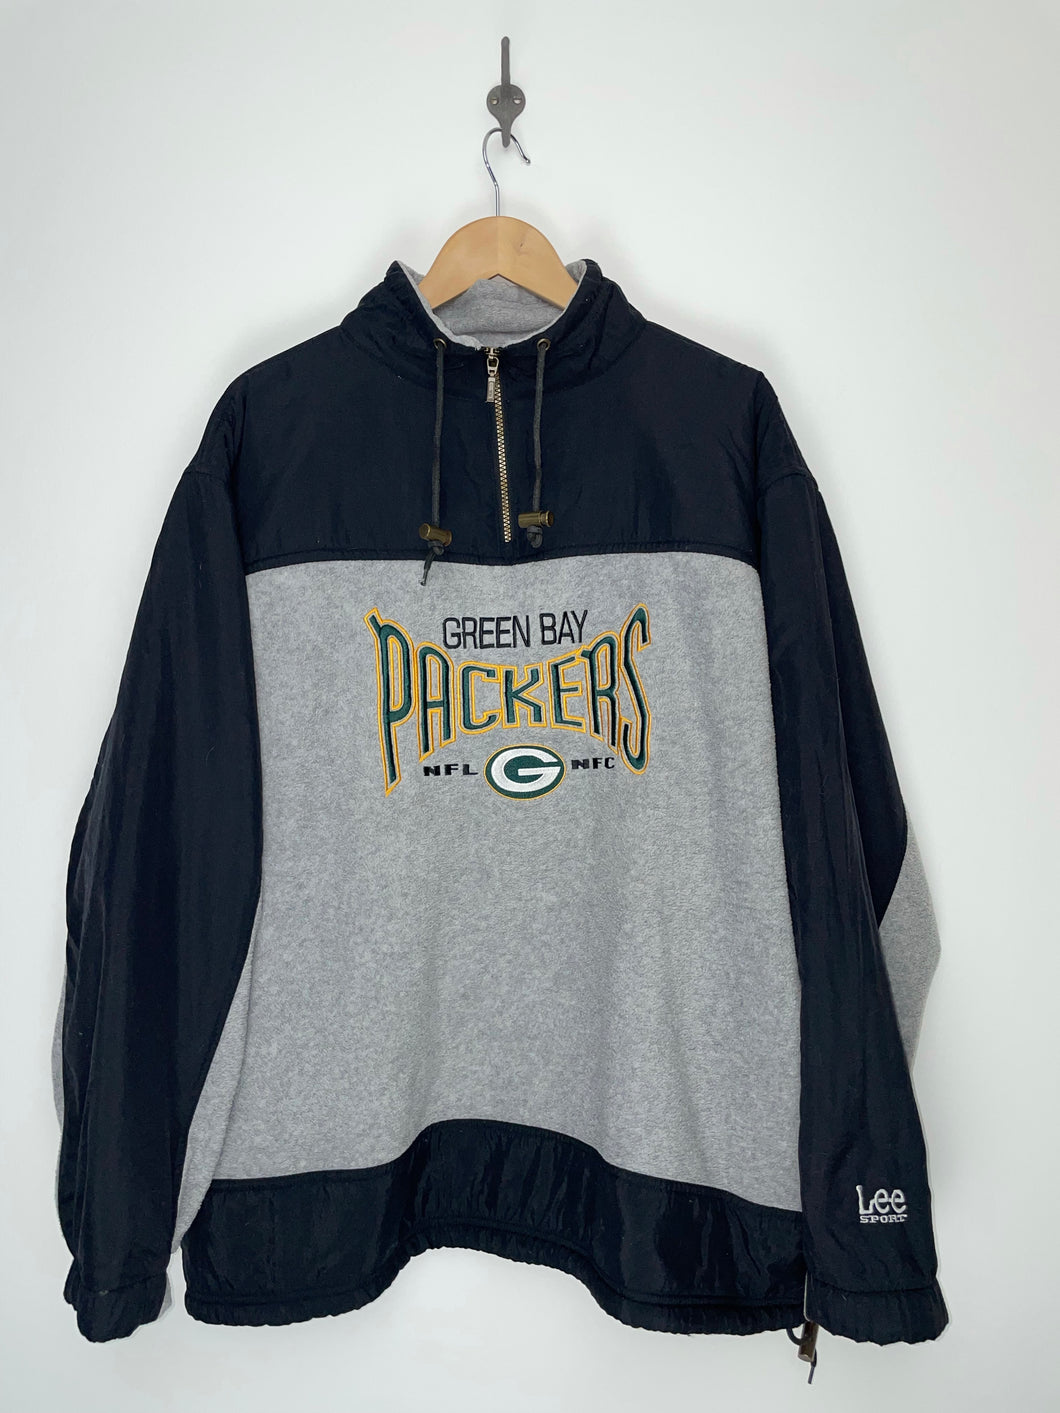 NFL Green Bay Packers Football Embroidered 1/4 Zip Pullover Sweatshirt - Lee Sport - XL